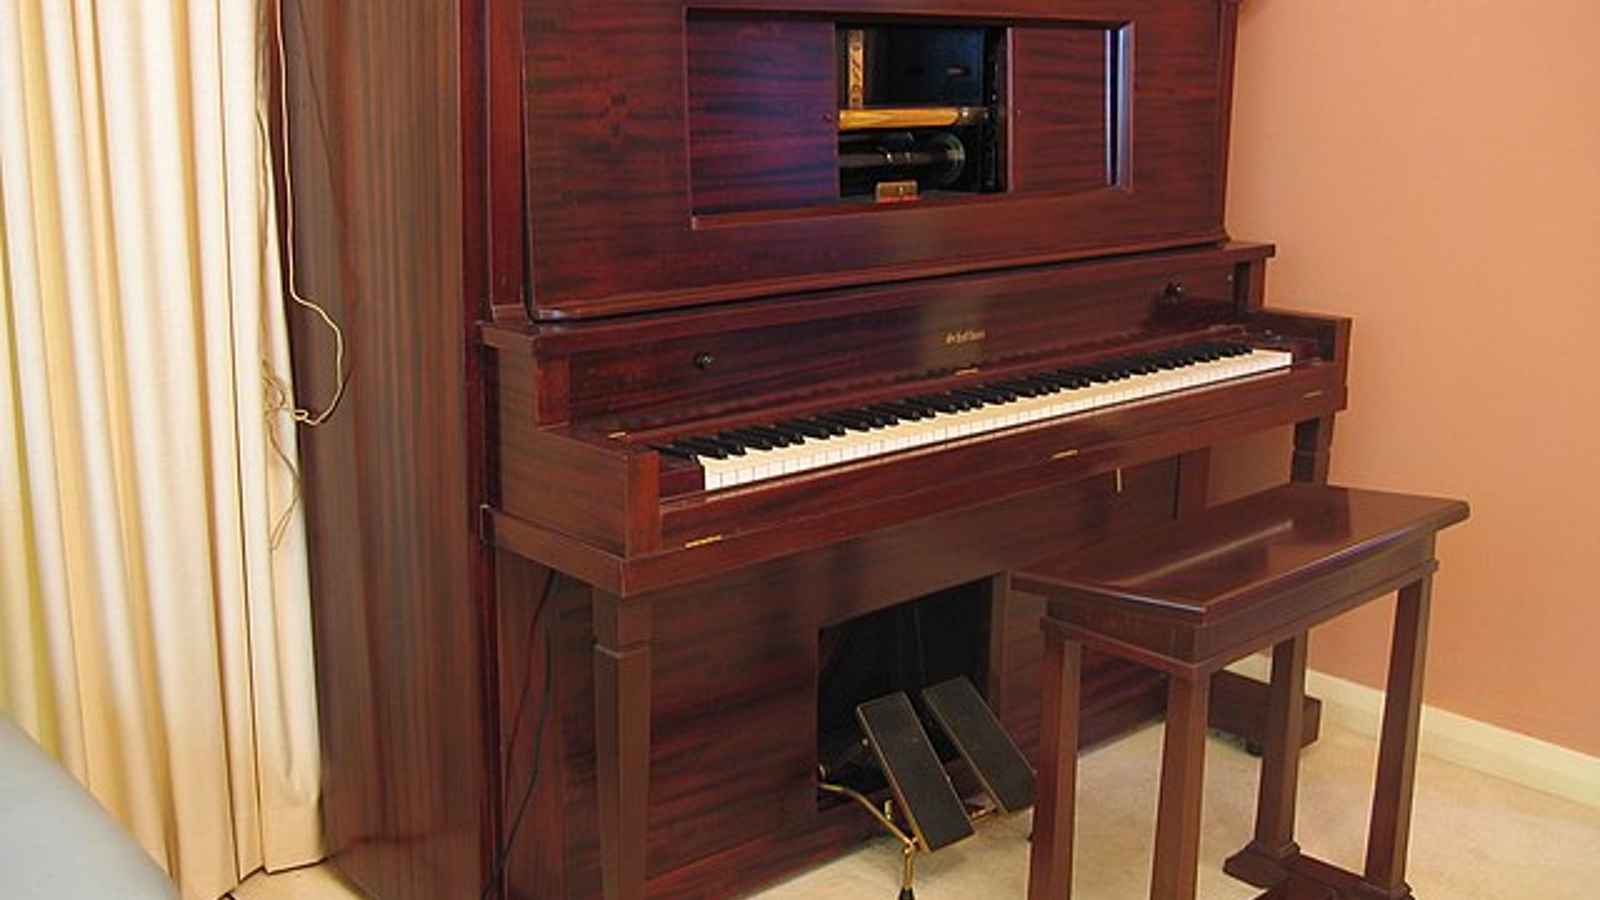 Old Time Player Piano Day 2023: Date, History, Facts, Activities